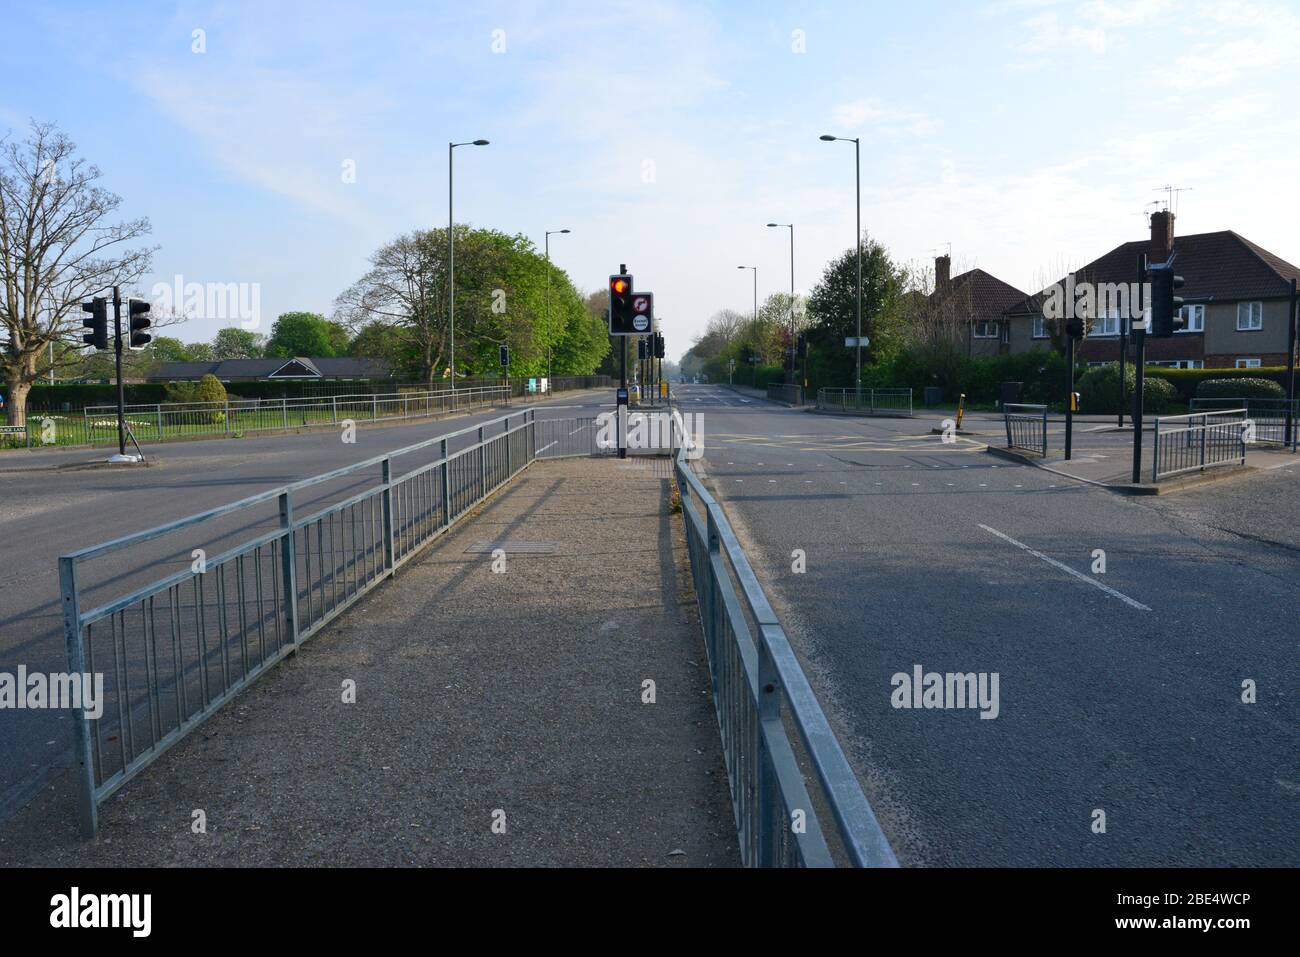 Empty traffic light during the Covid-19 Lock down in Horley, Surrey.  Being within 1 mile of Gatwick airport these lights are normally very busy. Stock Photo